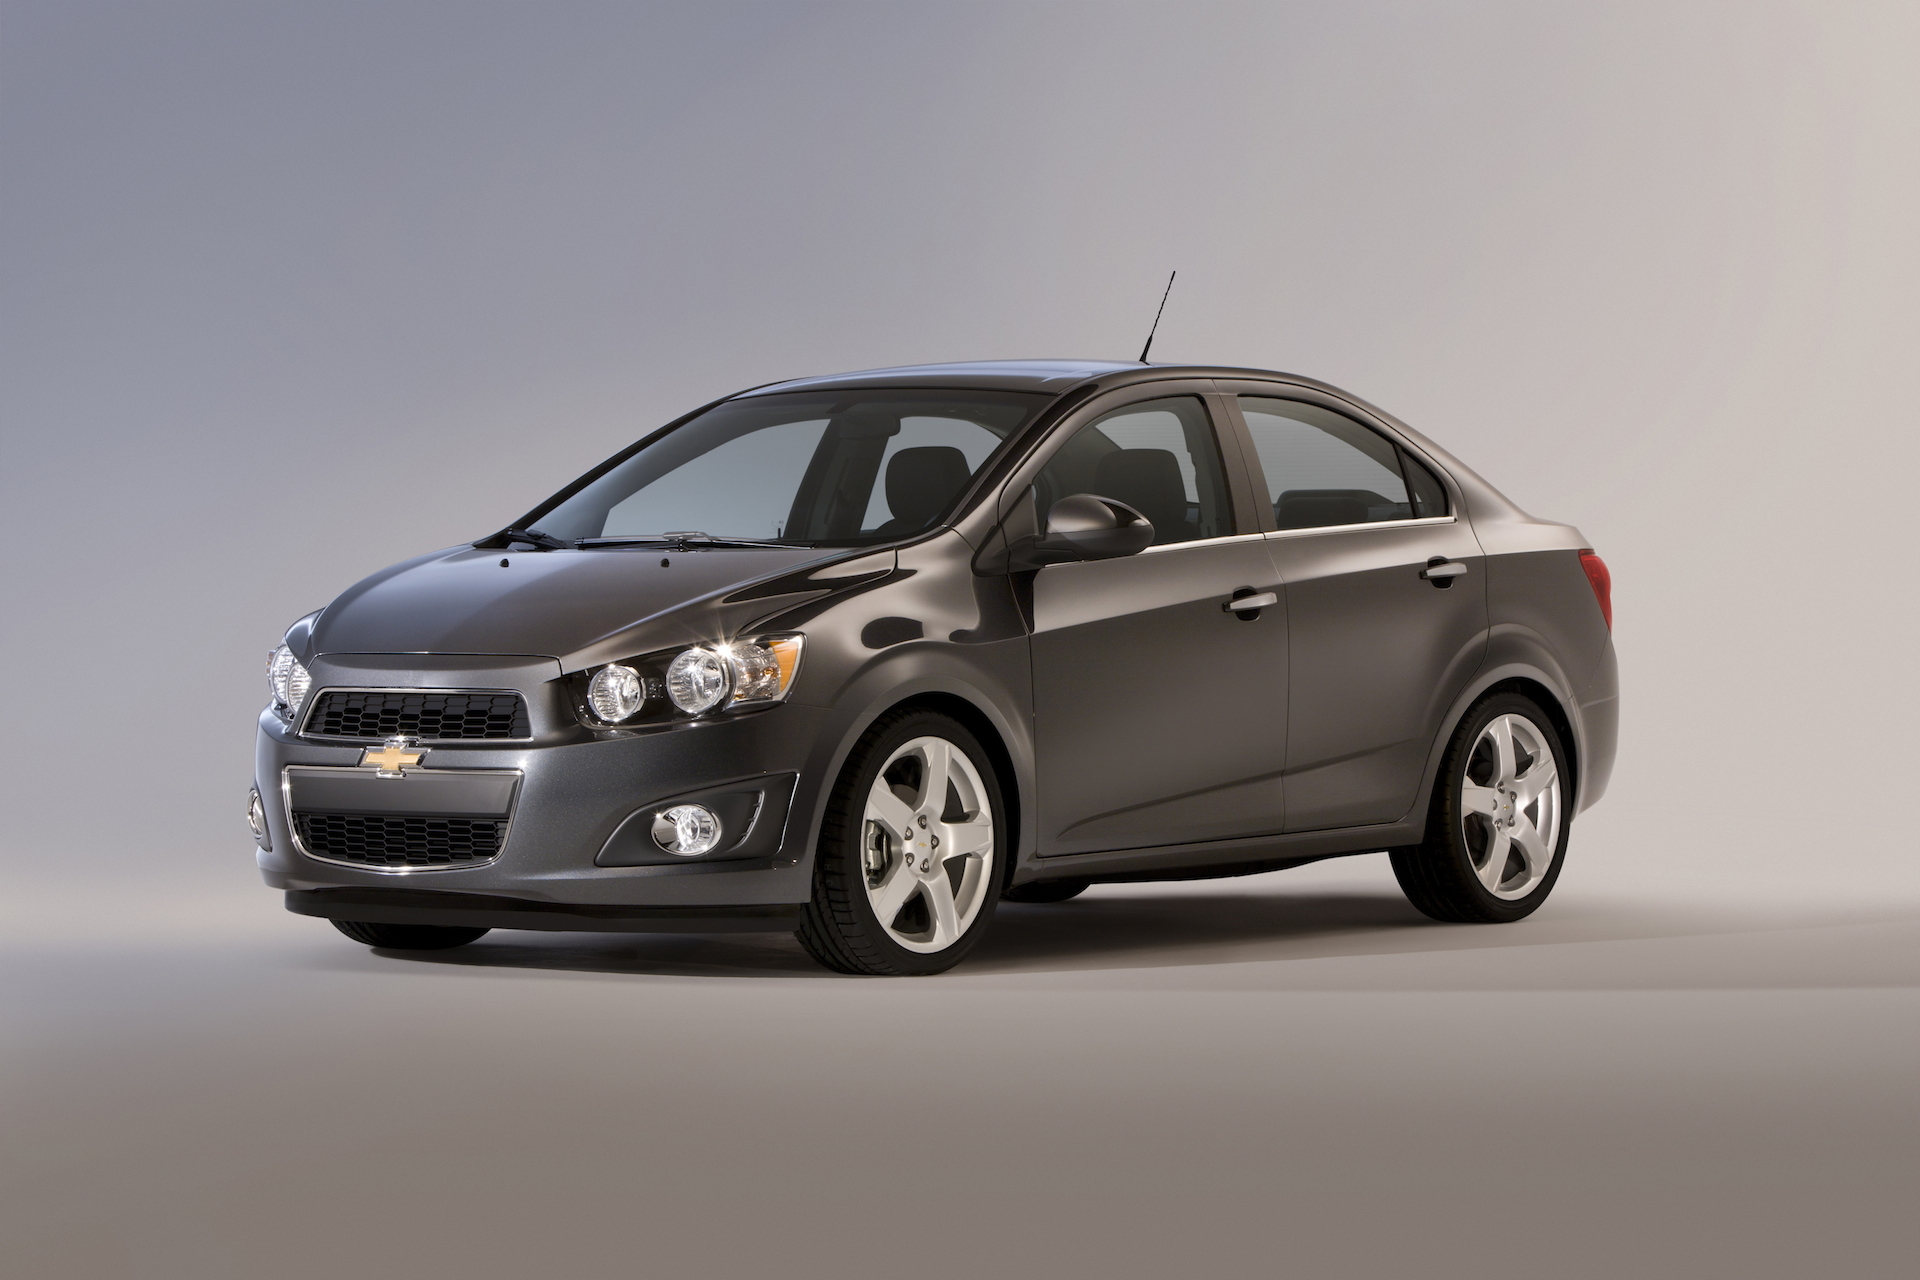 2016 Chevrolet Sonic (Chevy) Review, Ratings, Specs, Prices, and Photos